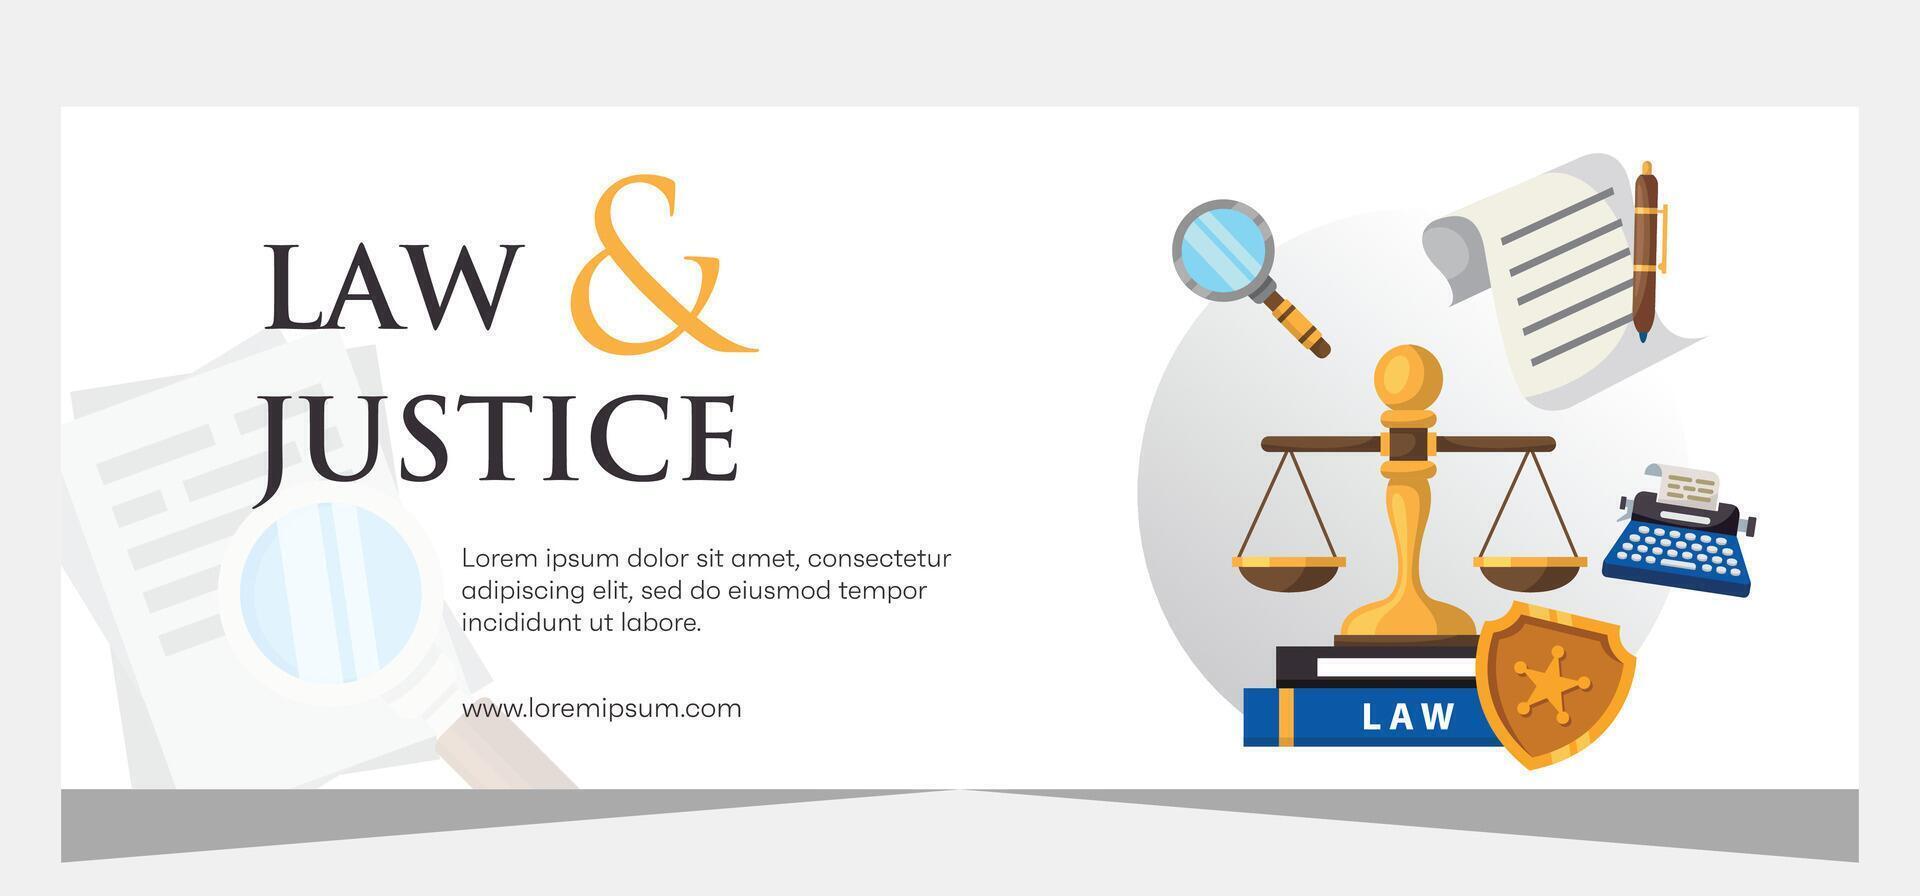 Law firm template banner design. Premium banner template vector